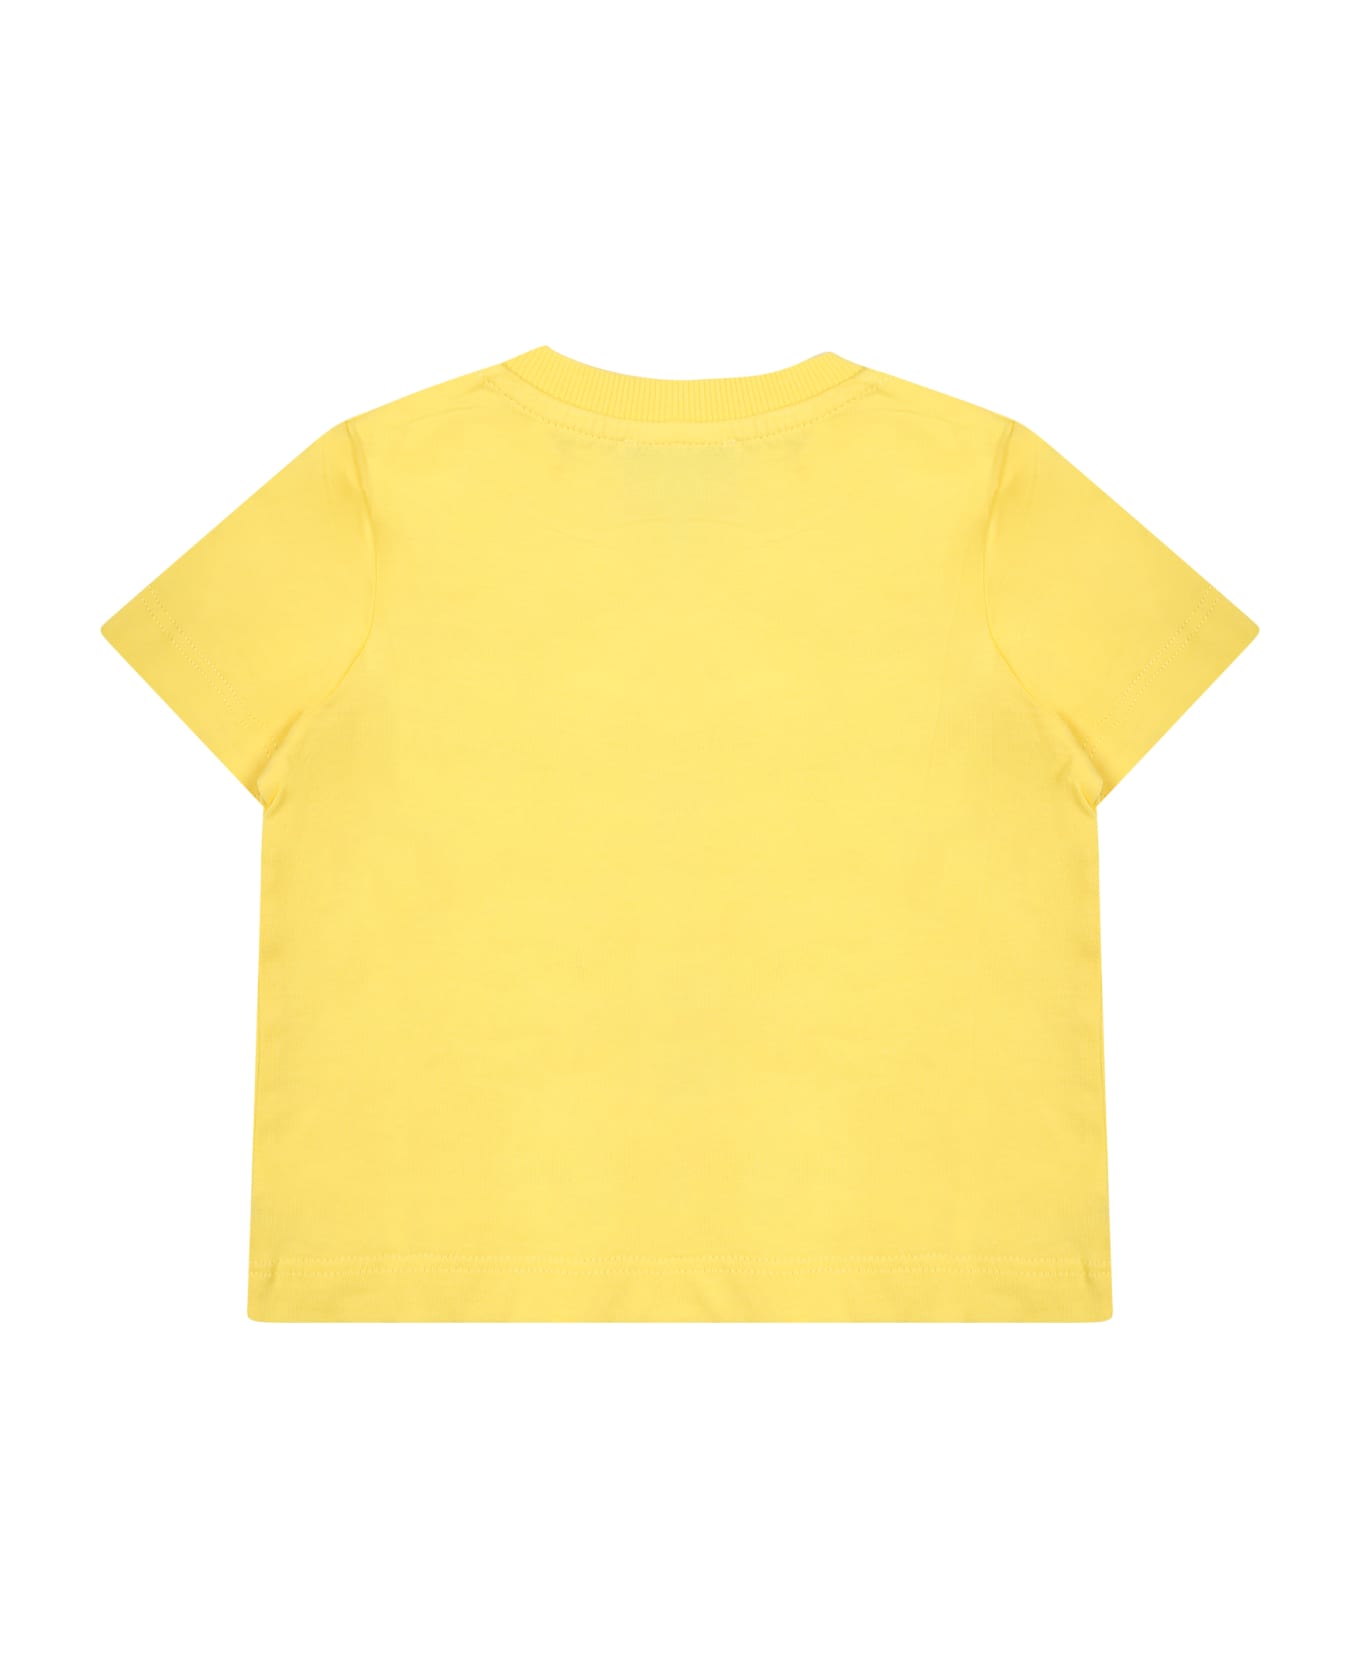 Moschino Yellow T-shirt For Baby Kids With Teddy Bear - Yellow